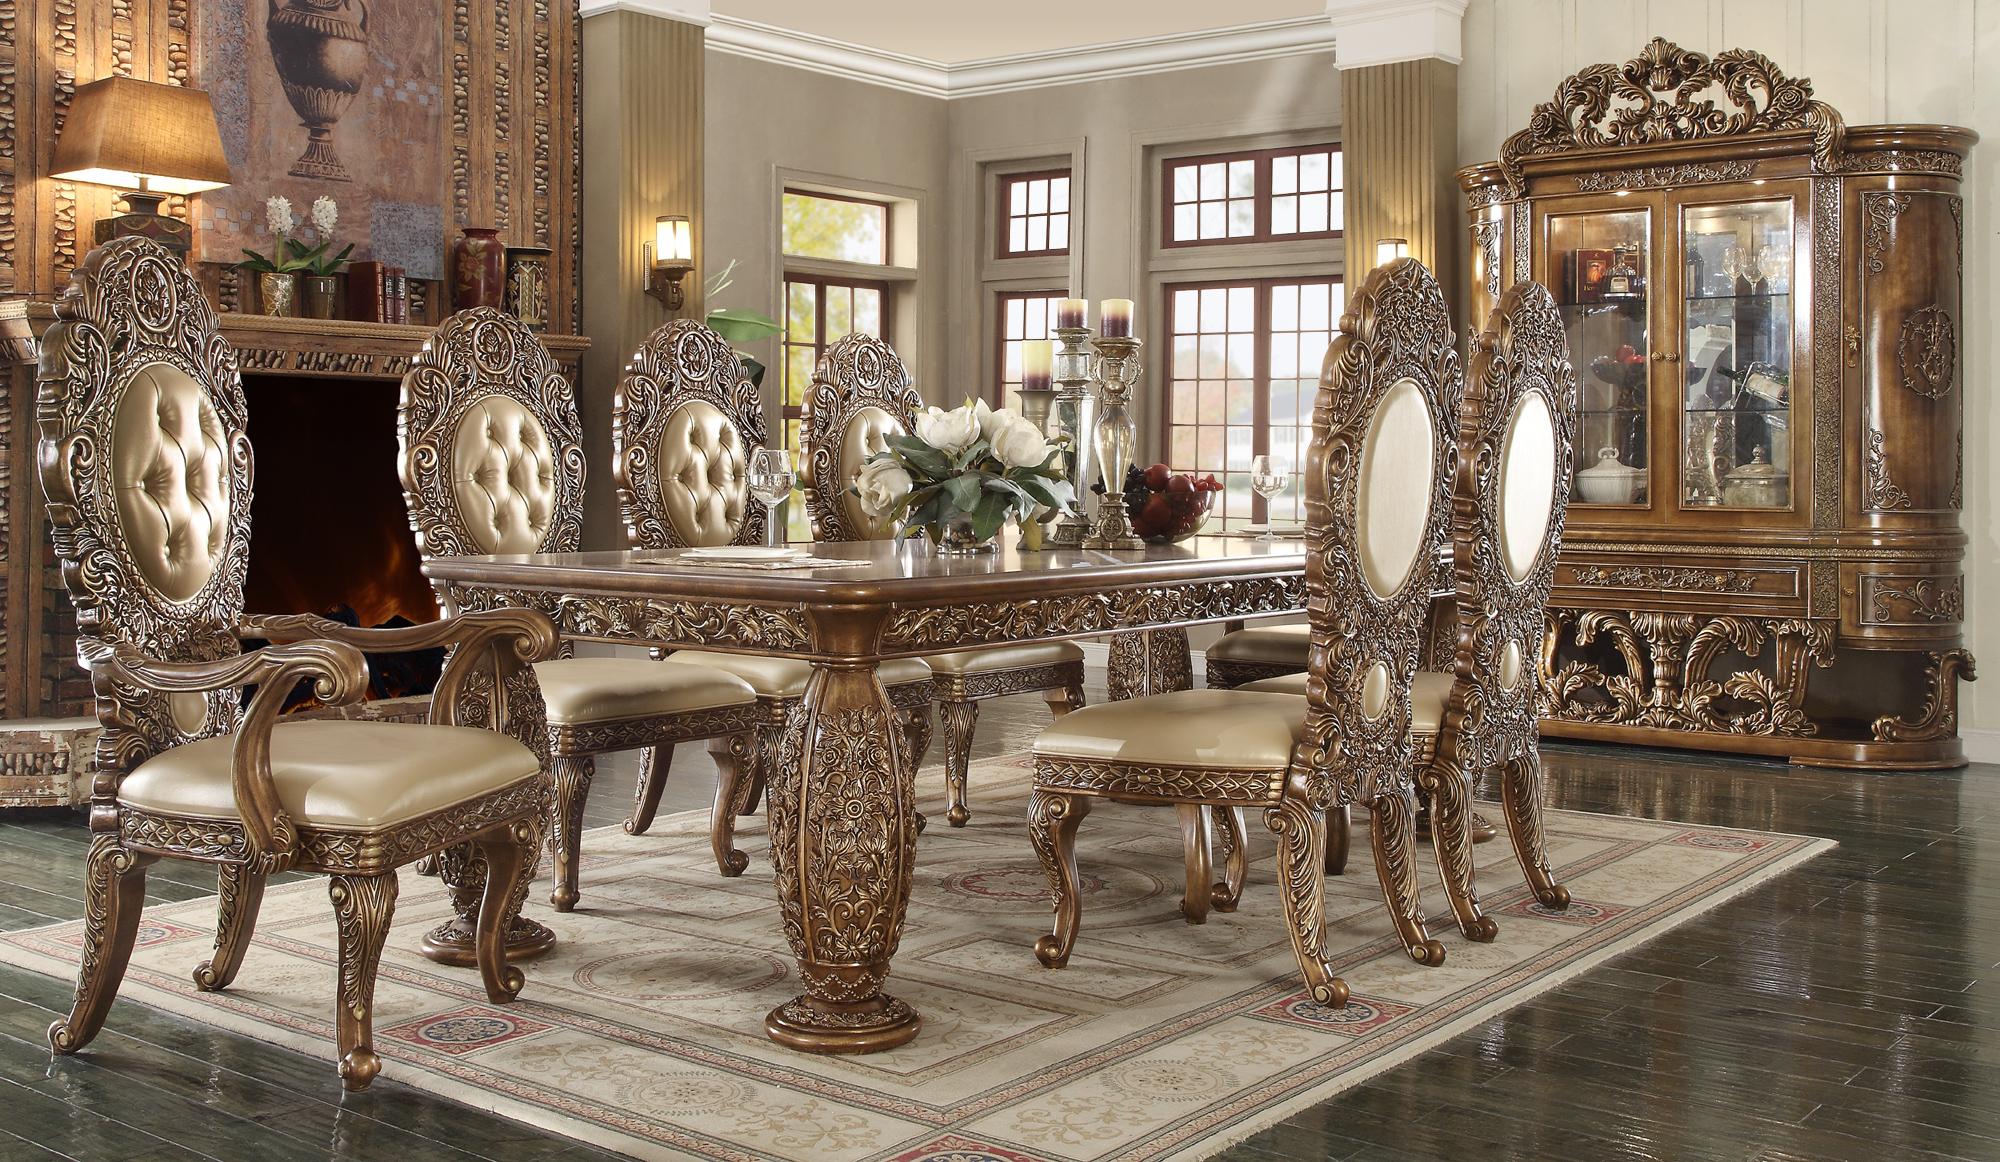 Traditional Dining Table Set HD-8018 – DINING TABLE SET HD-8018-10PC in Golden Brown Faux Leather